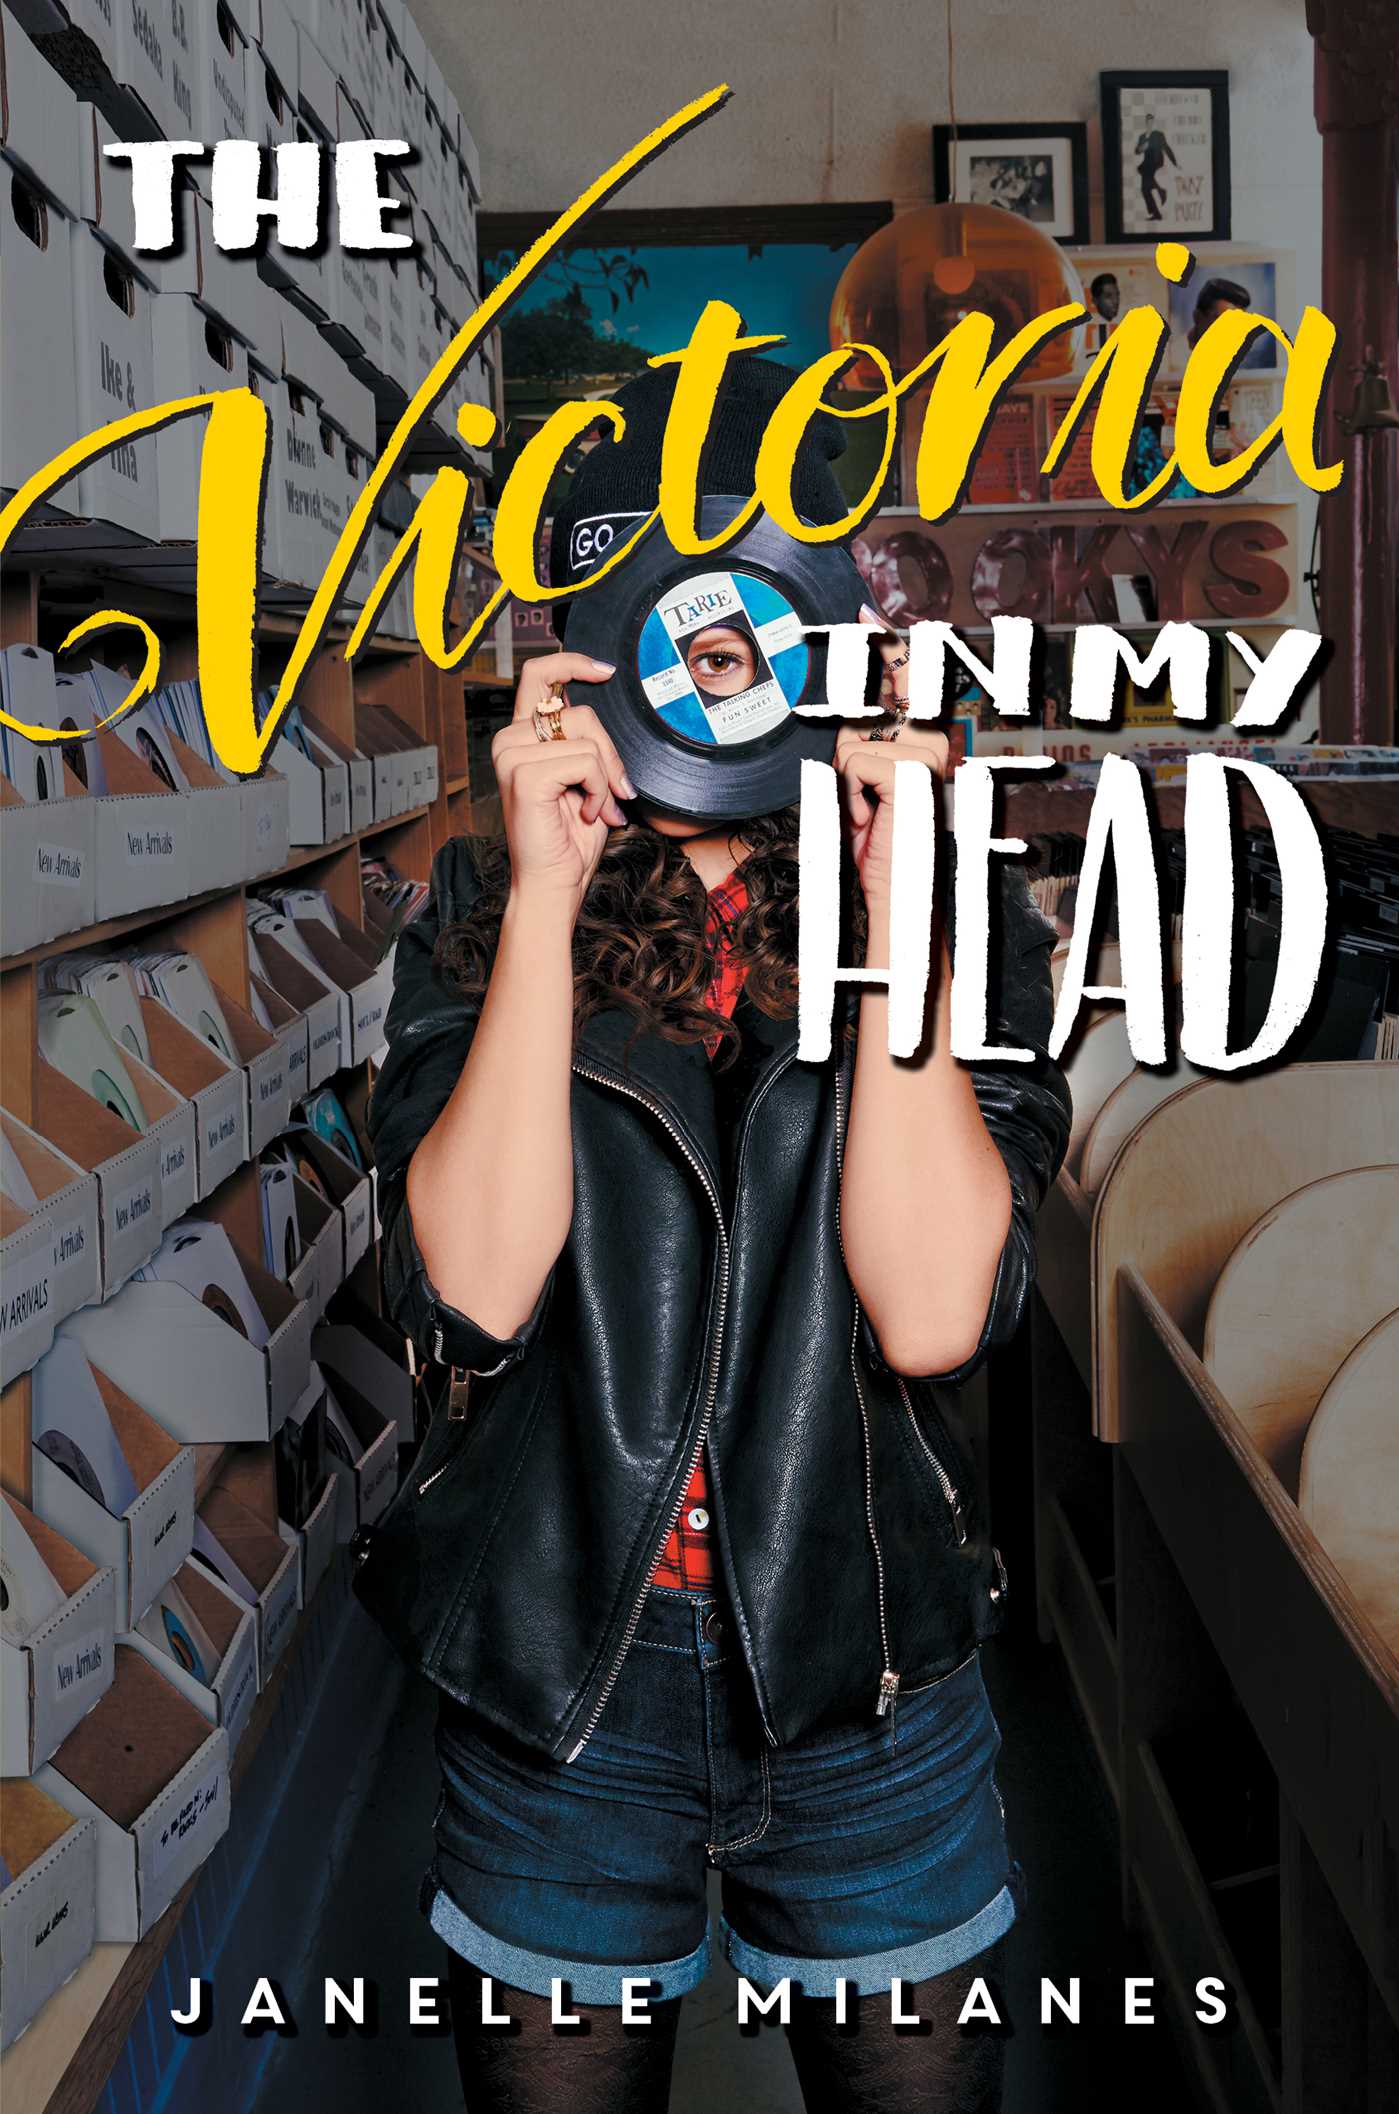 The Victoria in My Head by Janelle Milanes